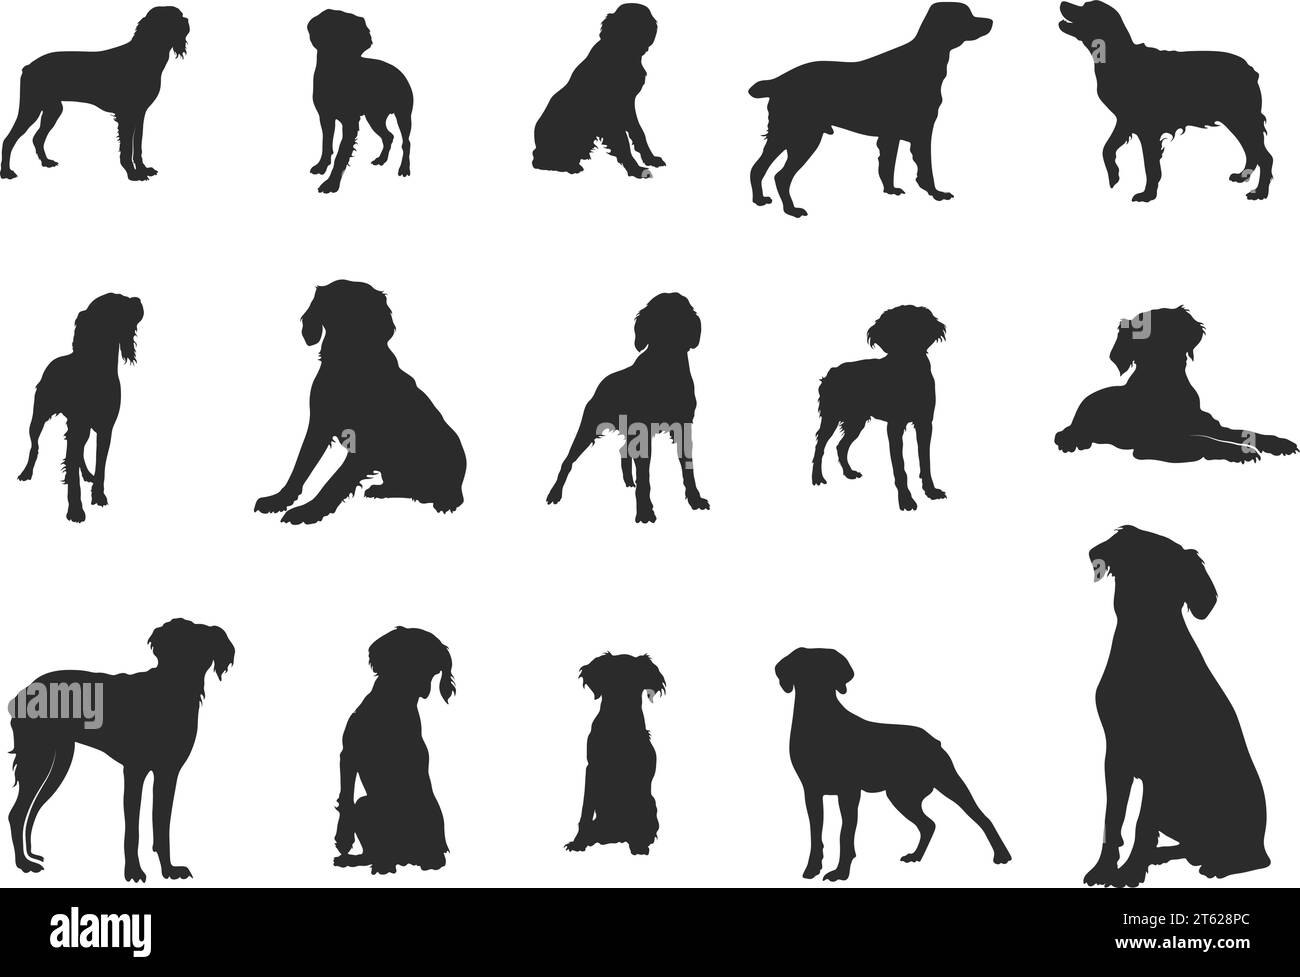 Brittany spaniel silhouette, Brittany dog clipart, Brittany dog svg, Dog silhouettes, Brittany dog icon. Stock Vector